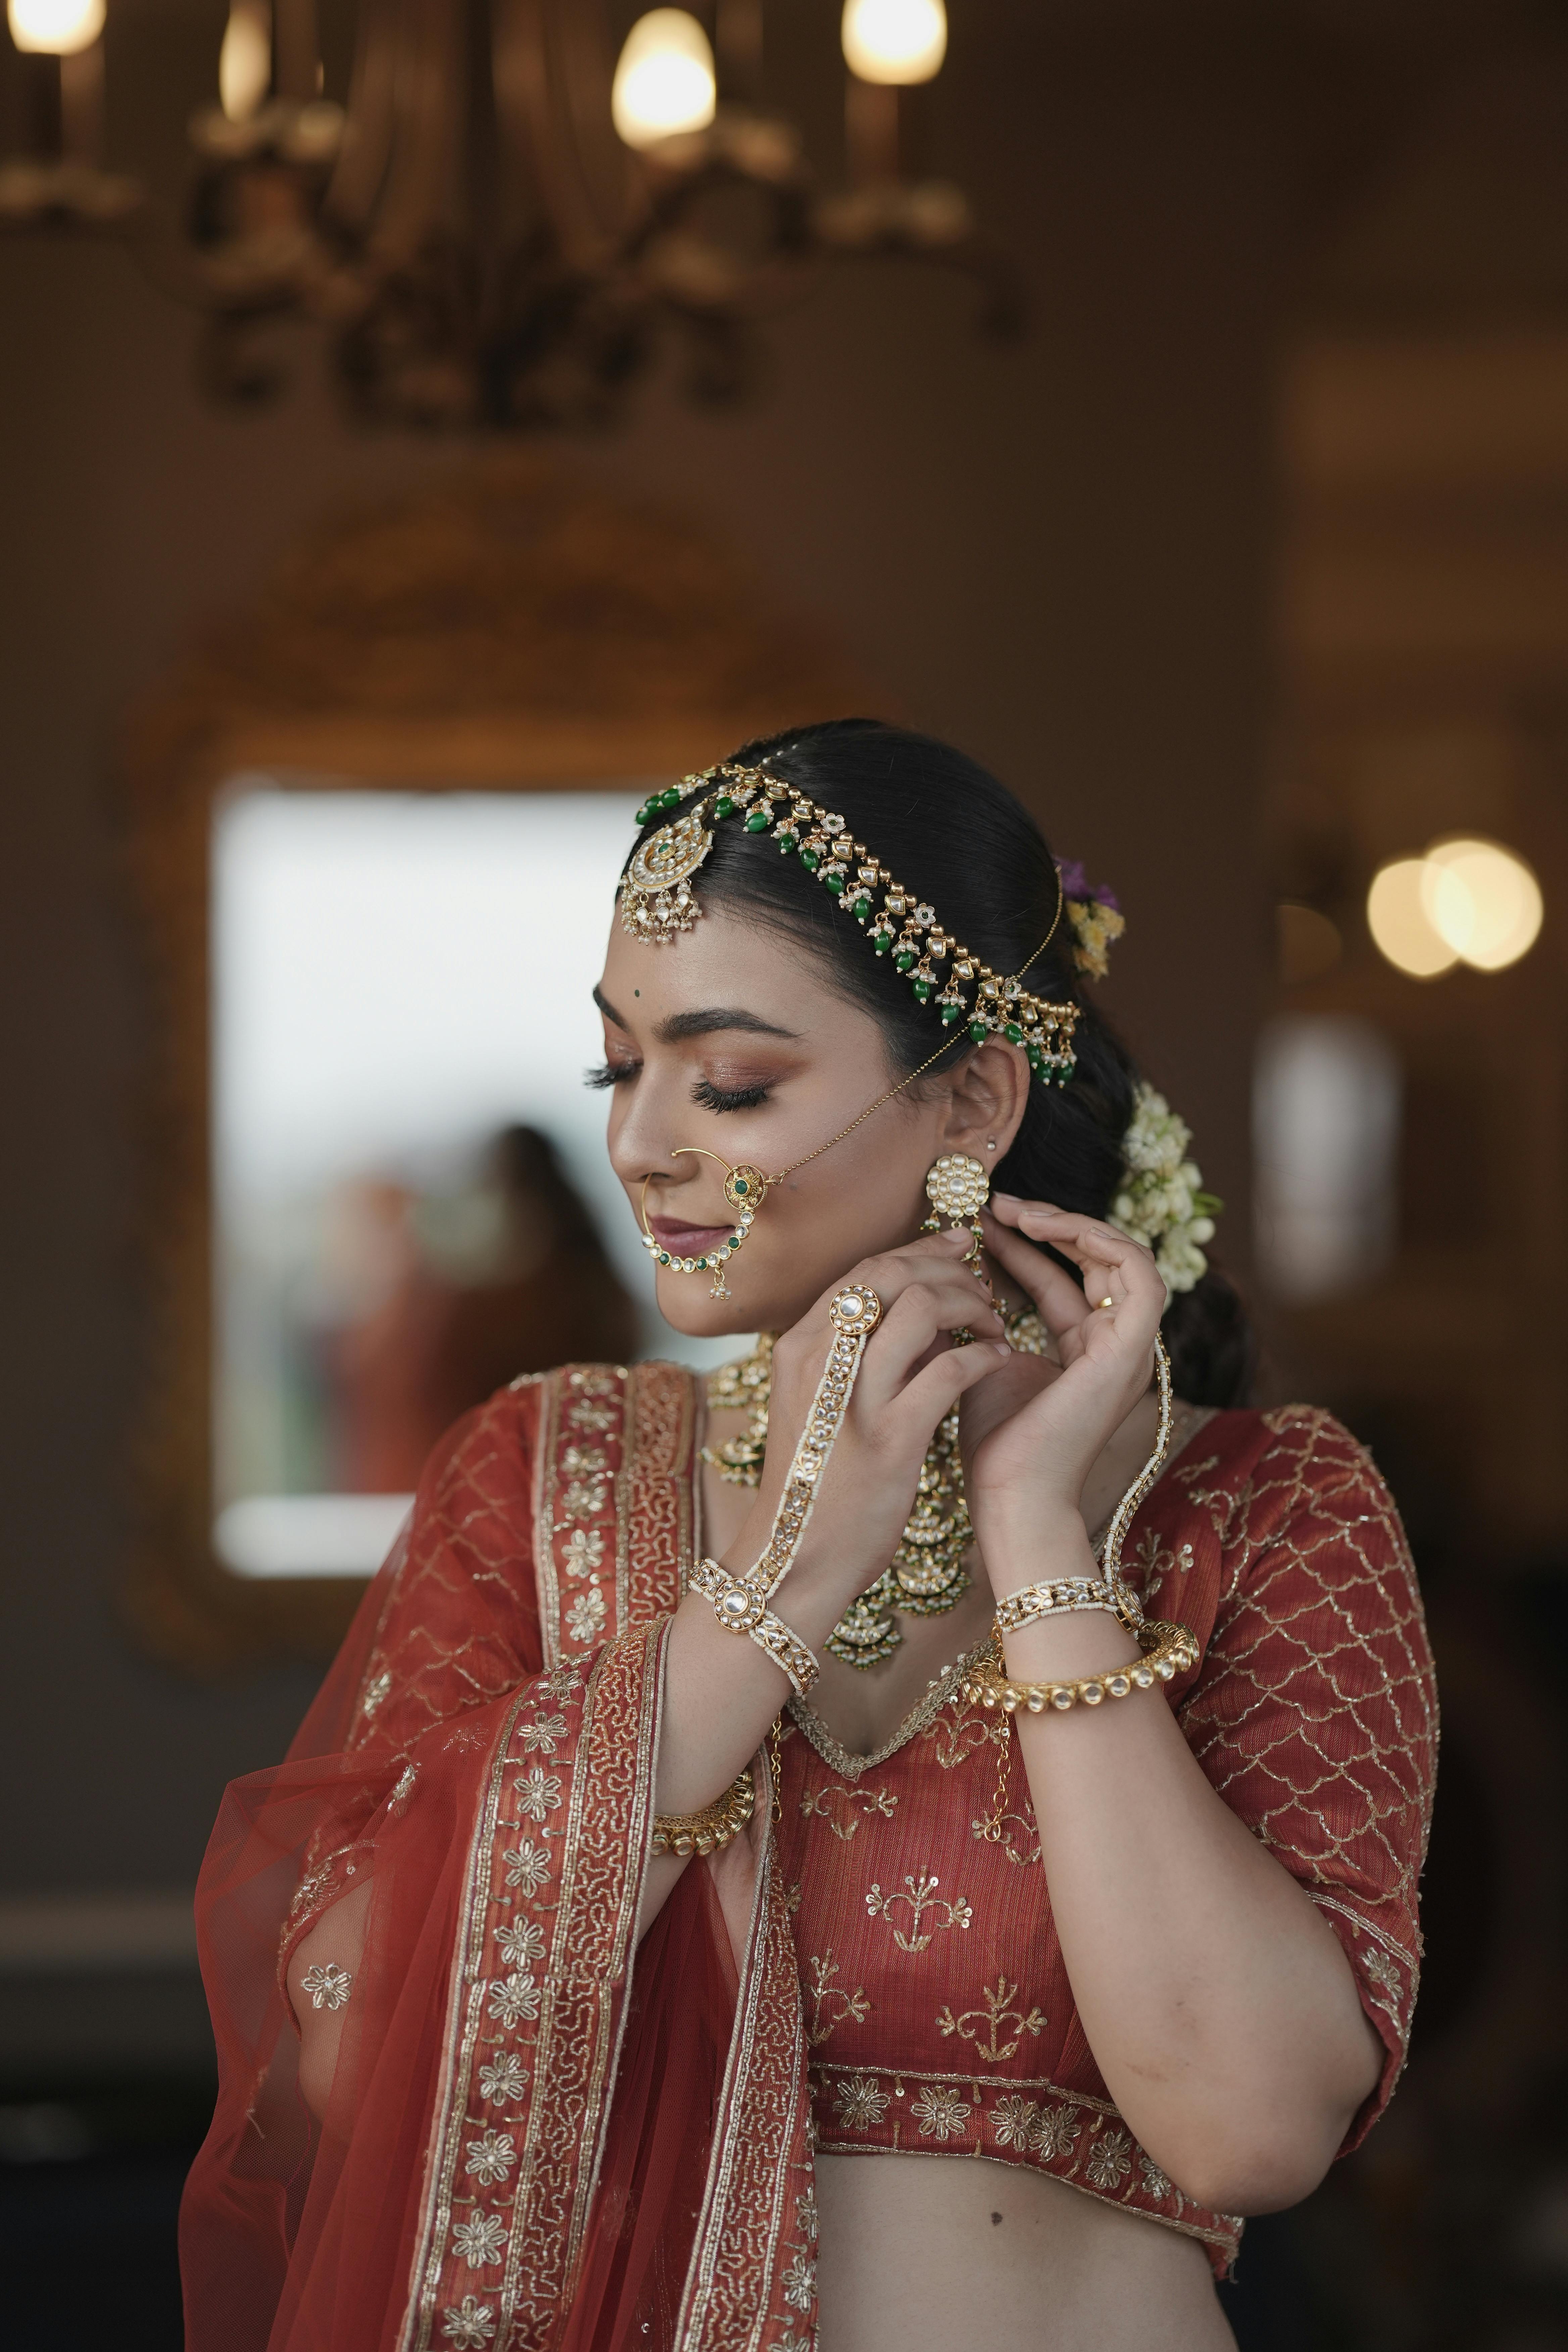 Young Model in a Traditional Indian Wedding Dress · Free Stock Photo